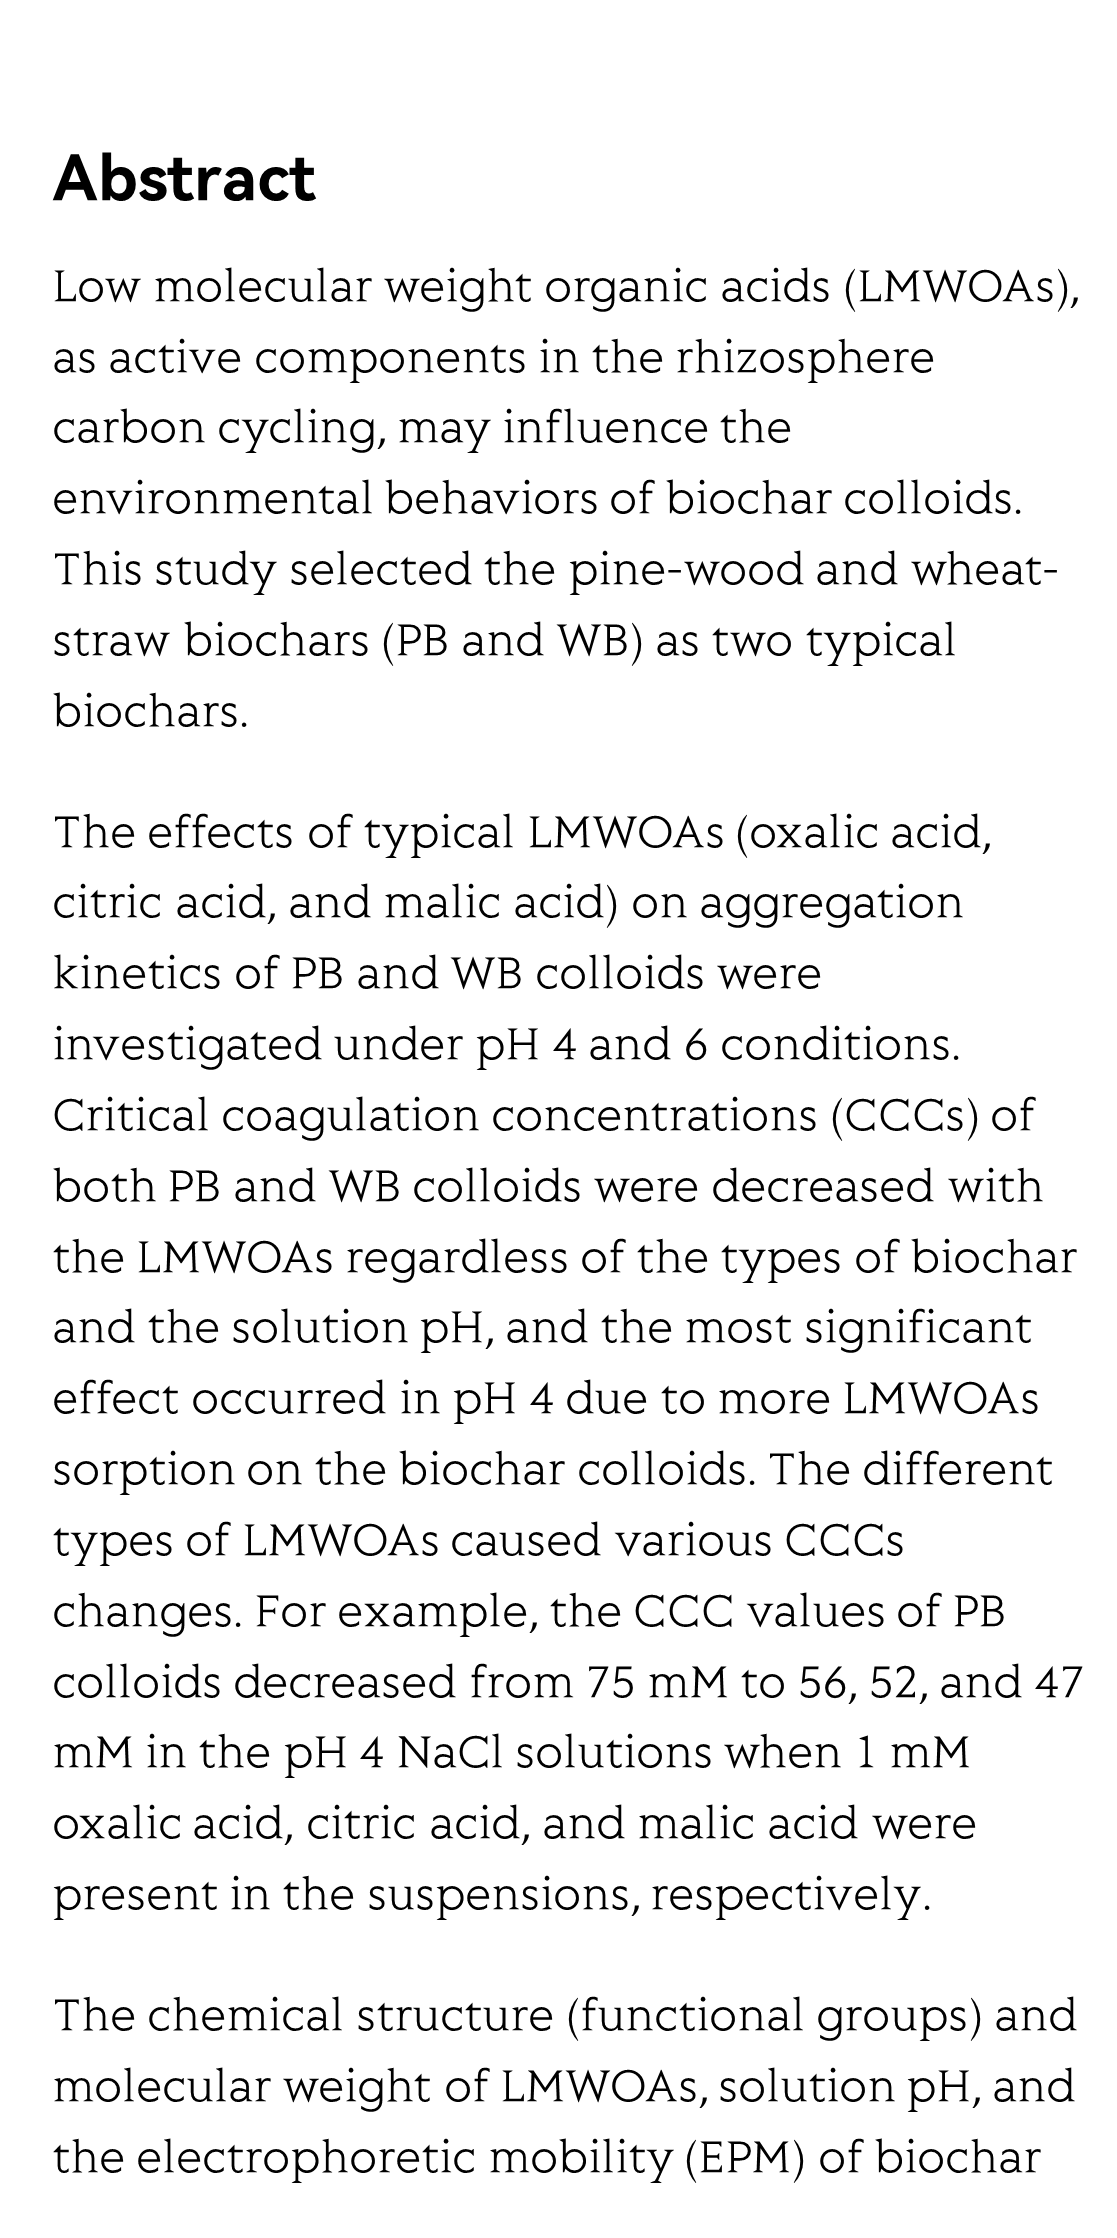 Effects of low molecular weight organic acids on aggregation behavior of biochar colloids at acid and neutral conditions_2